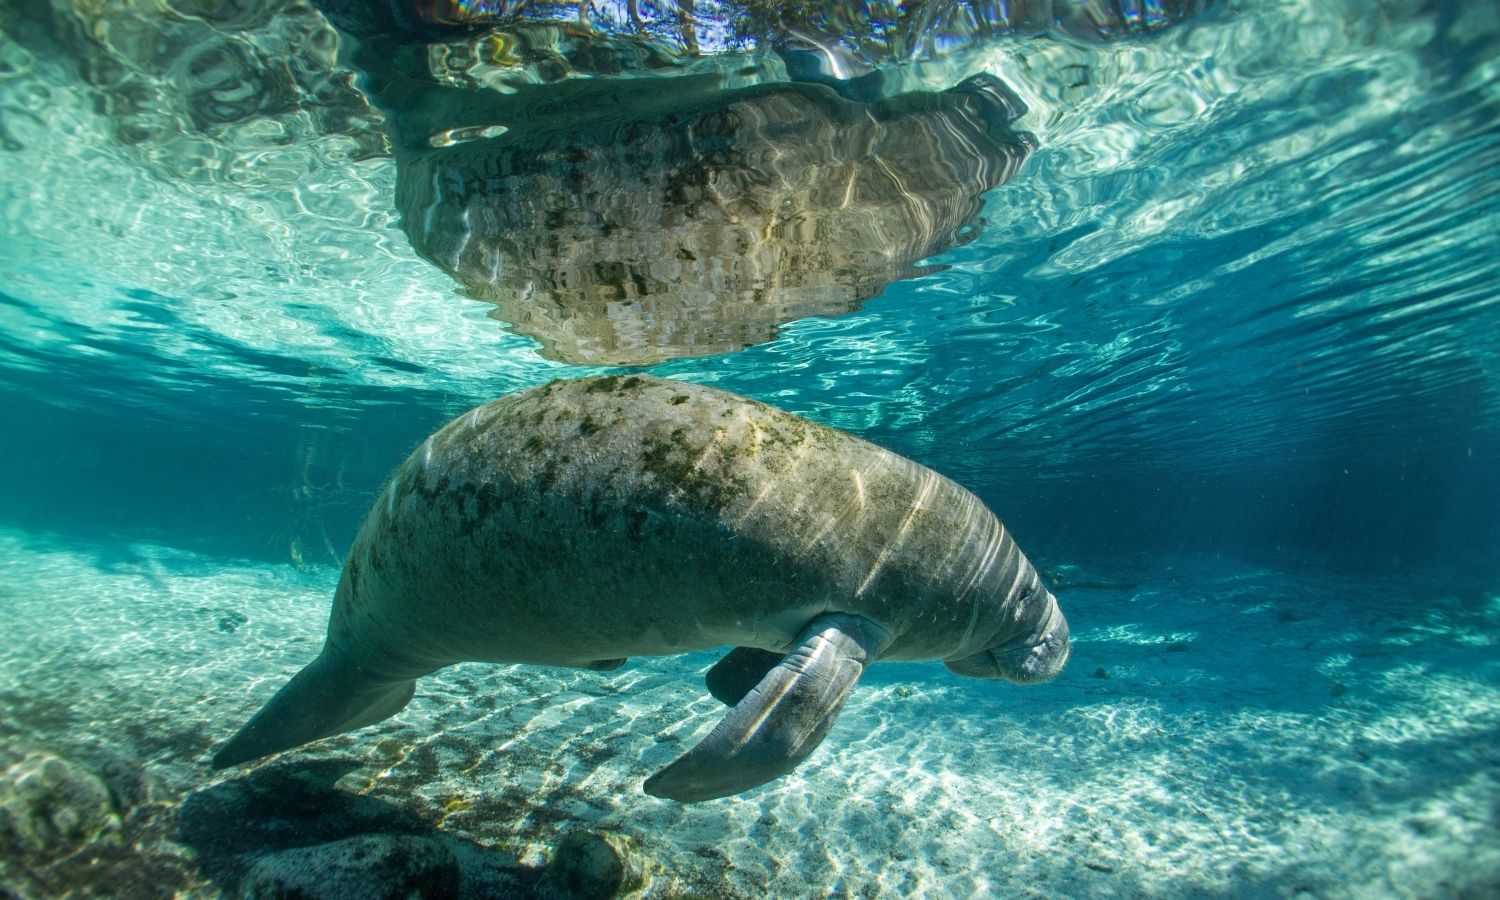 OTD in 1493: Christopher Columbus sighted manatees for the first time ever.